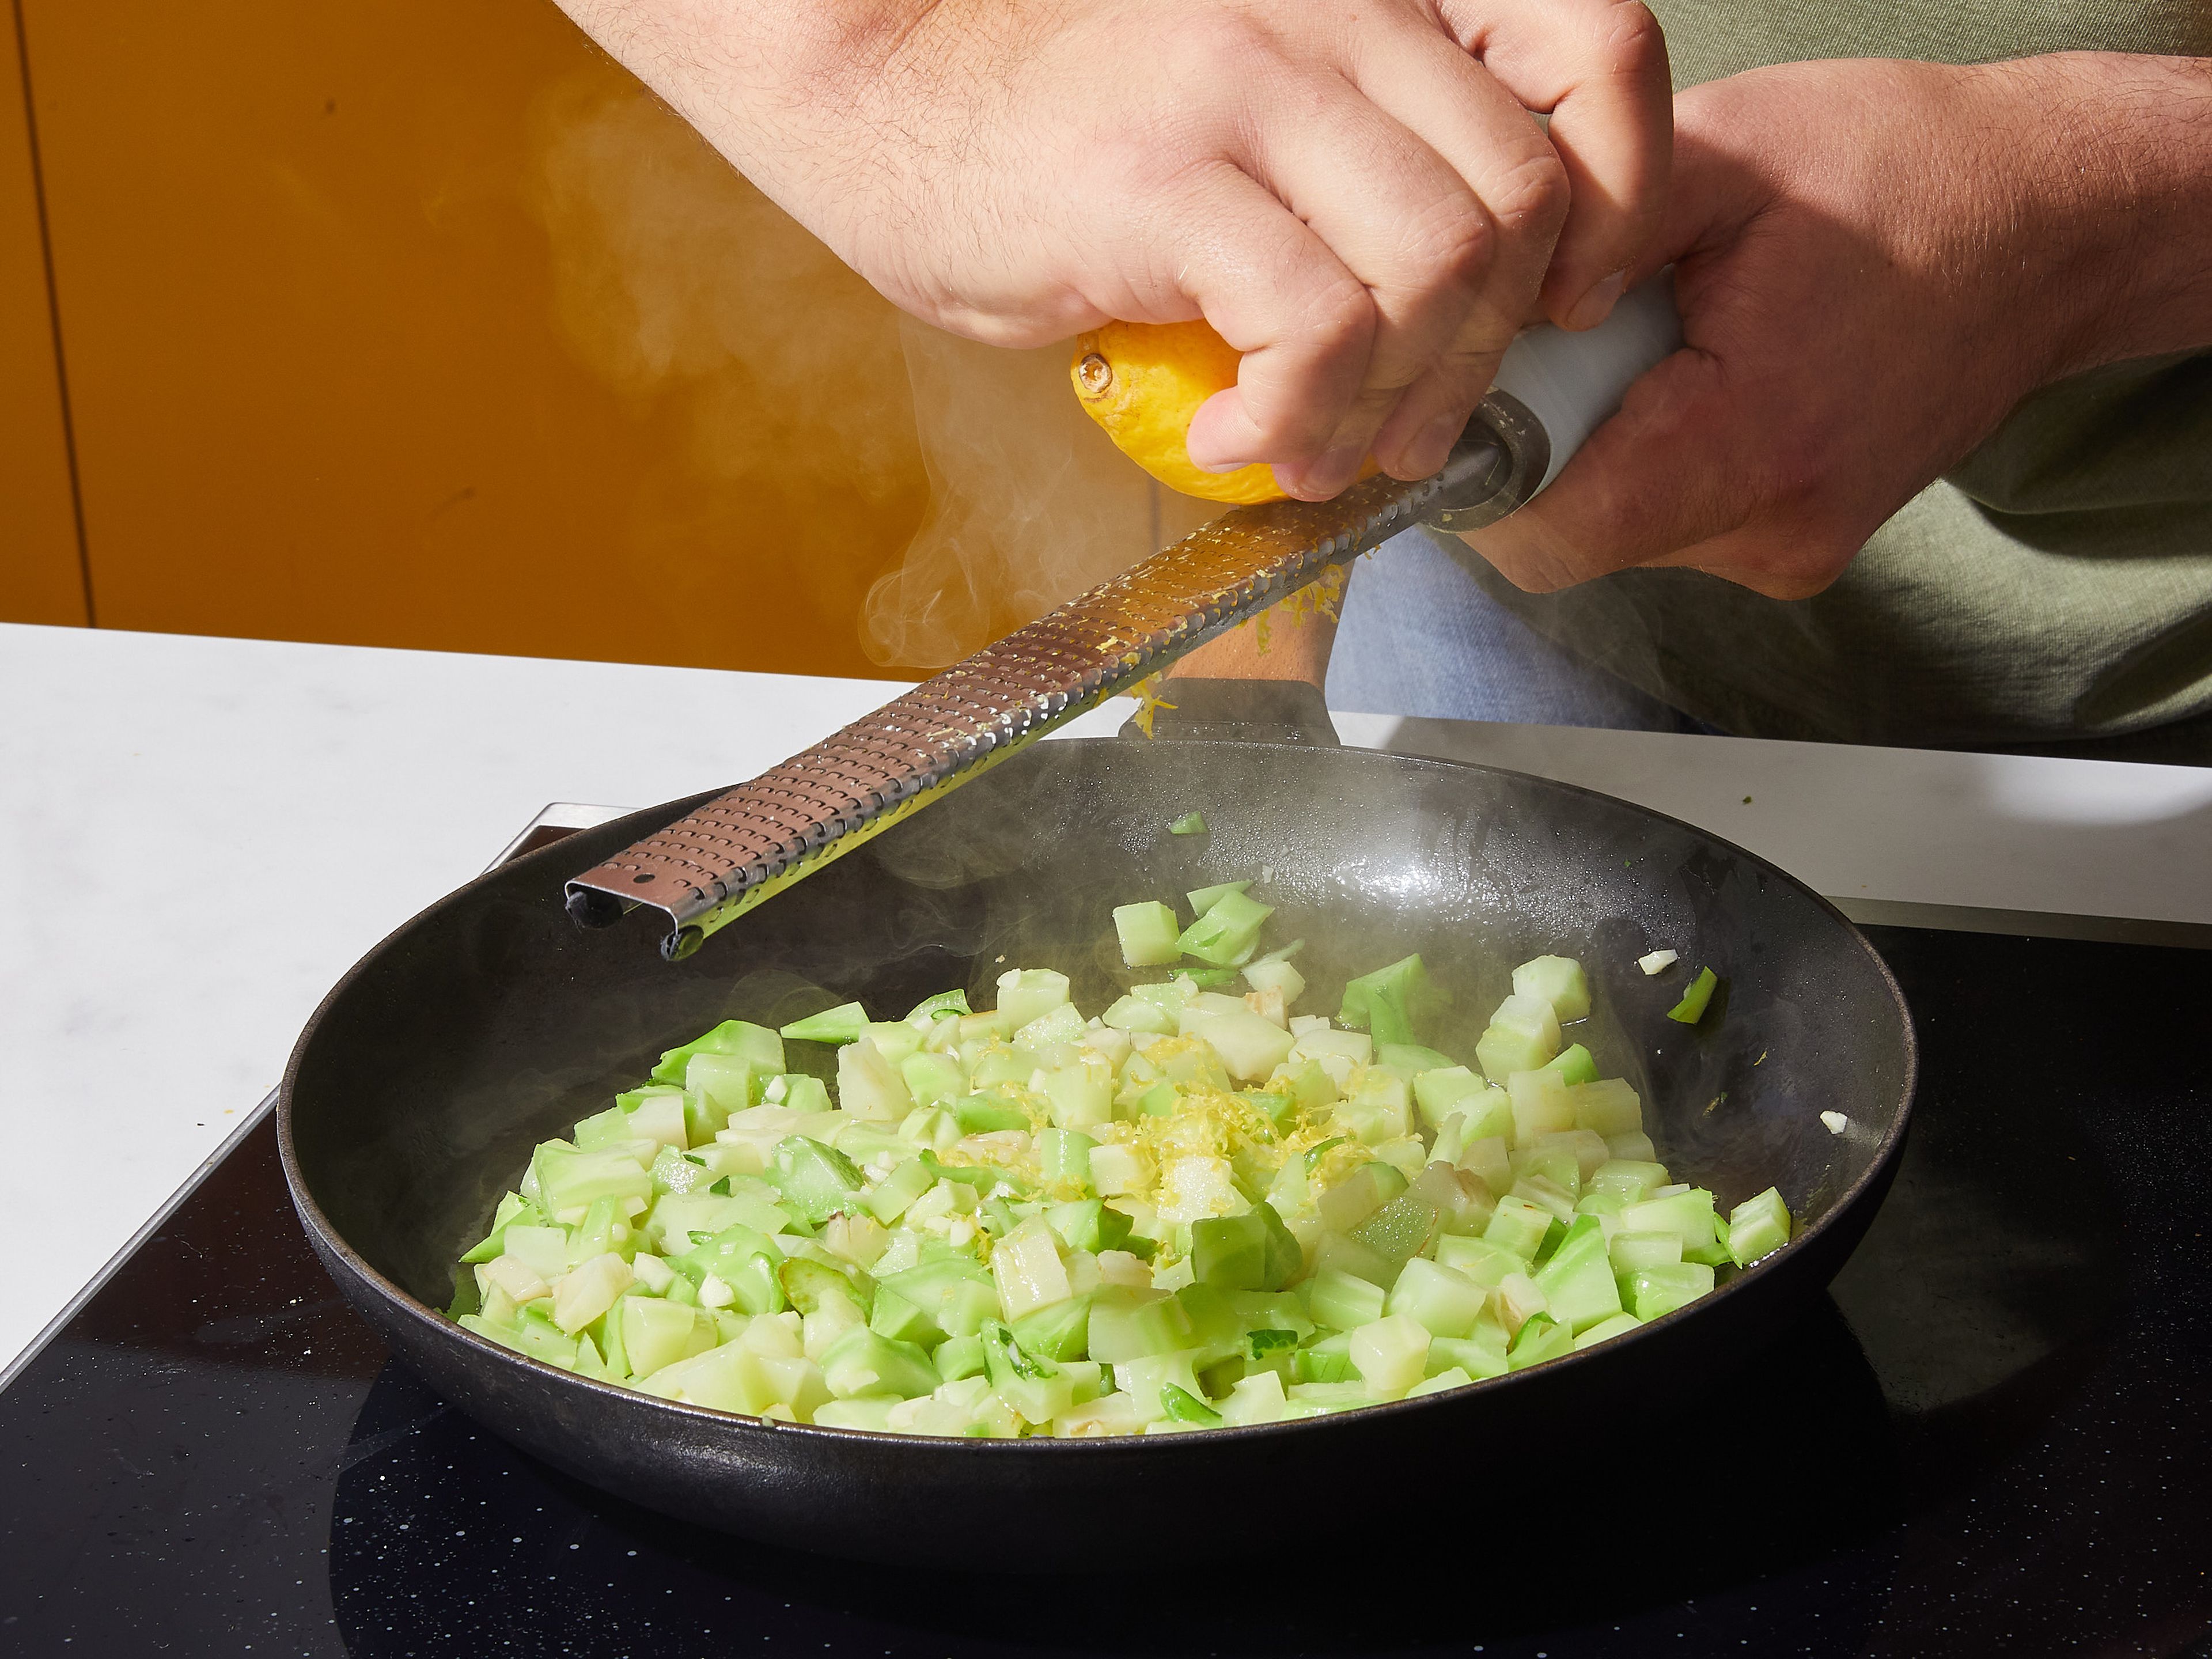 Wipe out frying pan and place over medium heat. Add olive oil, then add garlic and broccoli and let cook approx. 2 min. Remove from heat and toss with lemon zest, juice, salt, and pepper.